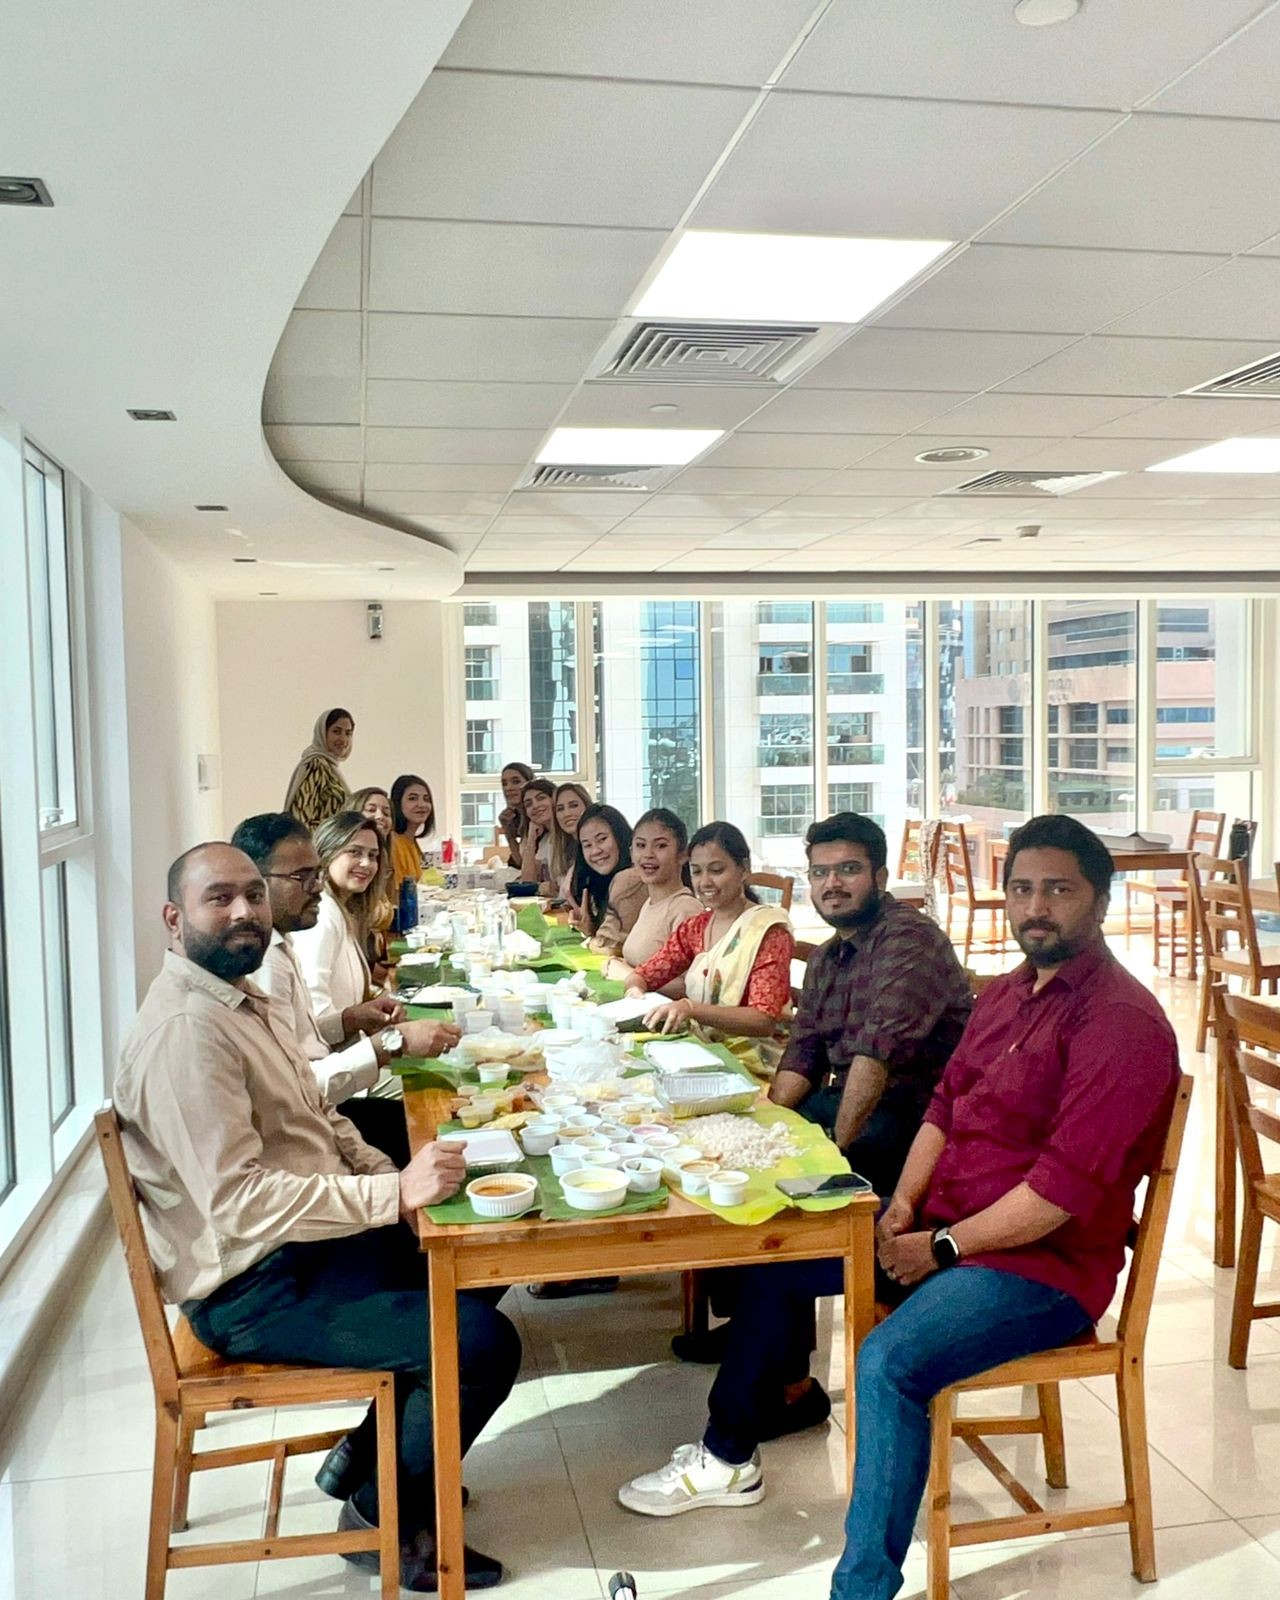 Harvest Festival, lunch treat for all in UAE office